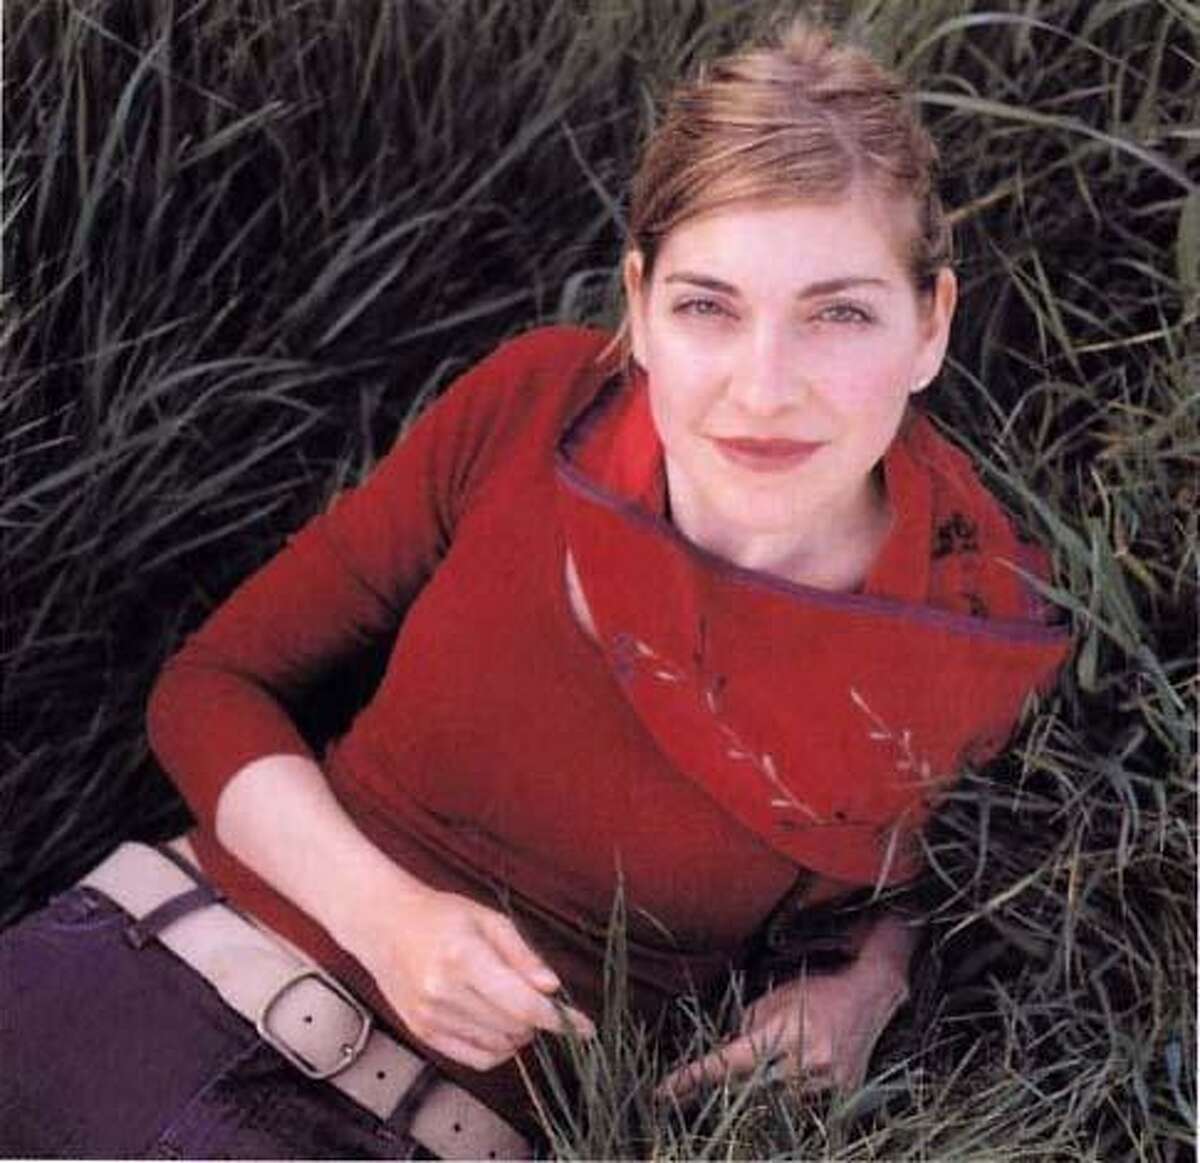 Photo of author Julie Orringer from the book jacket of her novel "How to Breathe Underwater" (Knopf)